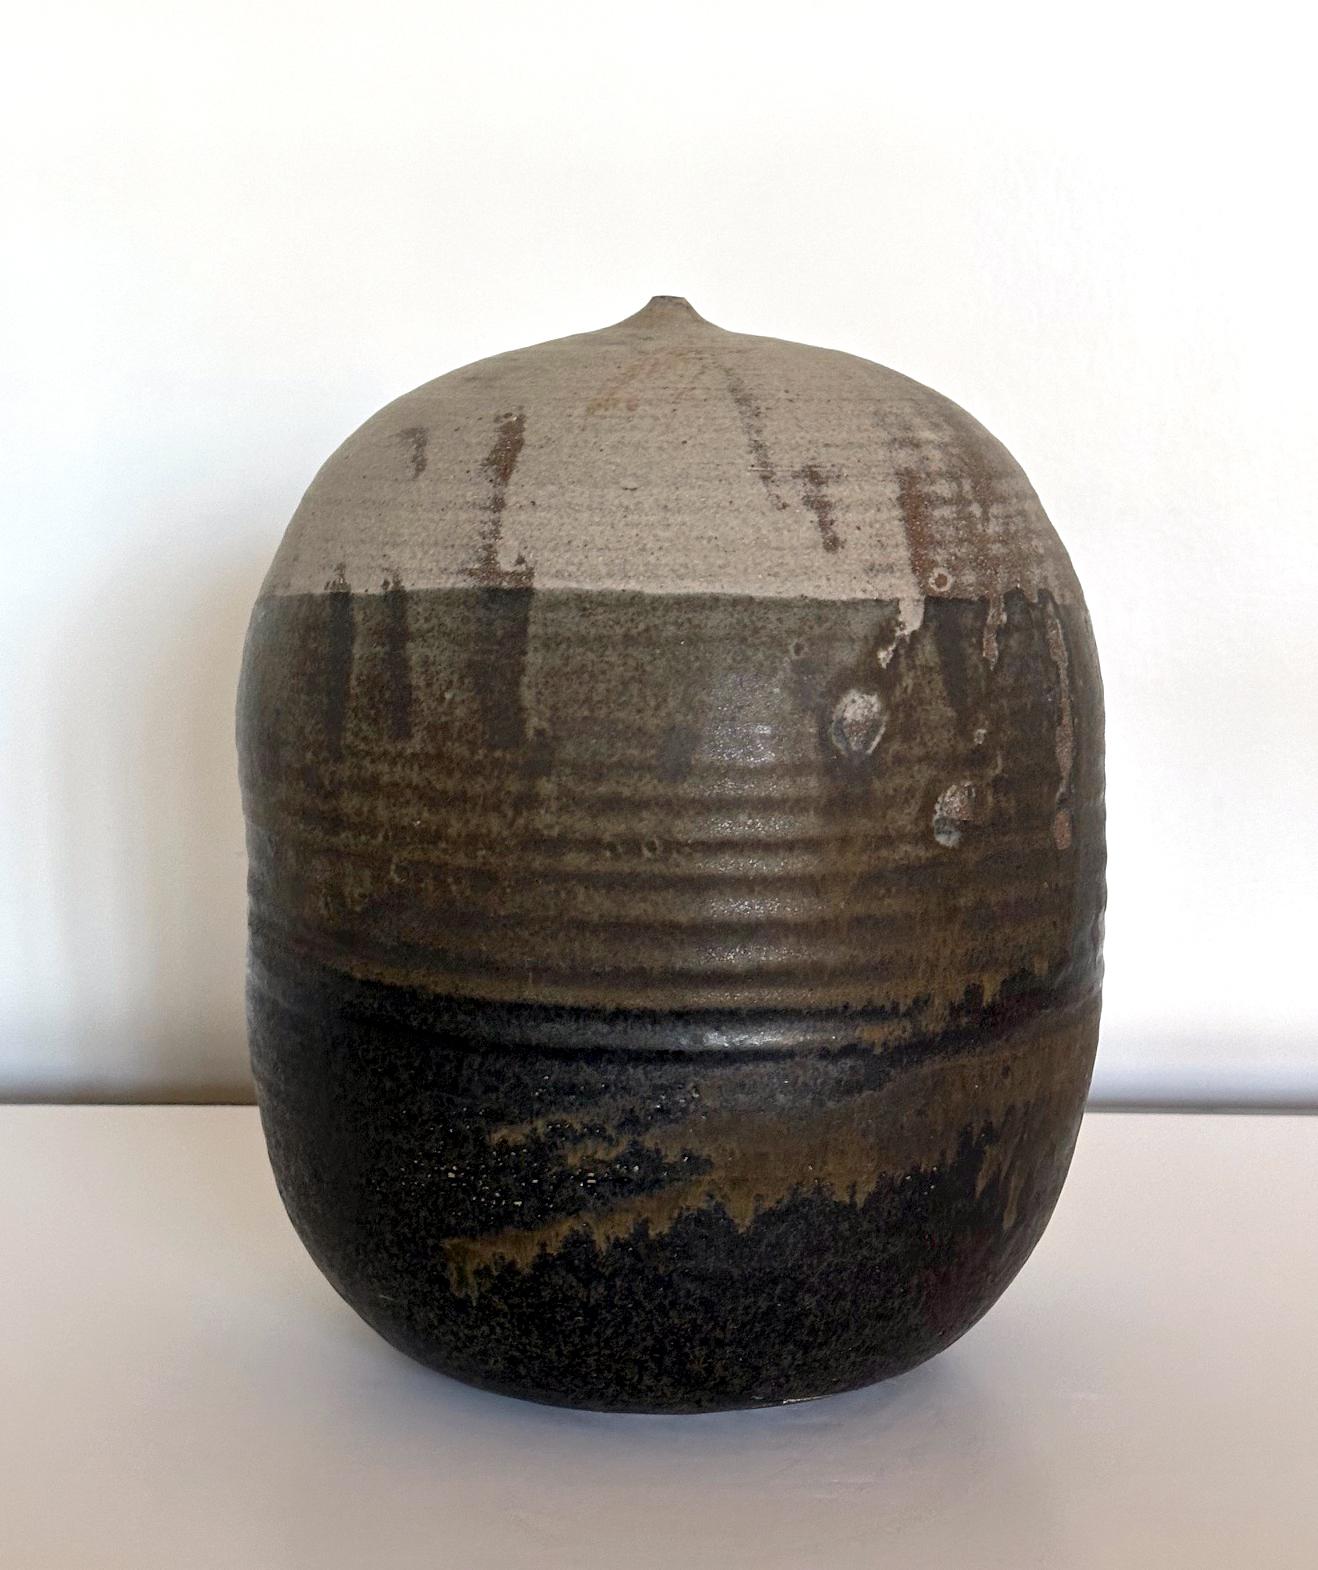 American Important Storied Tall Ceramic Pot with Rattle and Handprints by Toshiko Takaezu For Sale